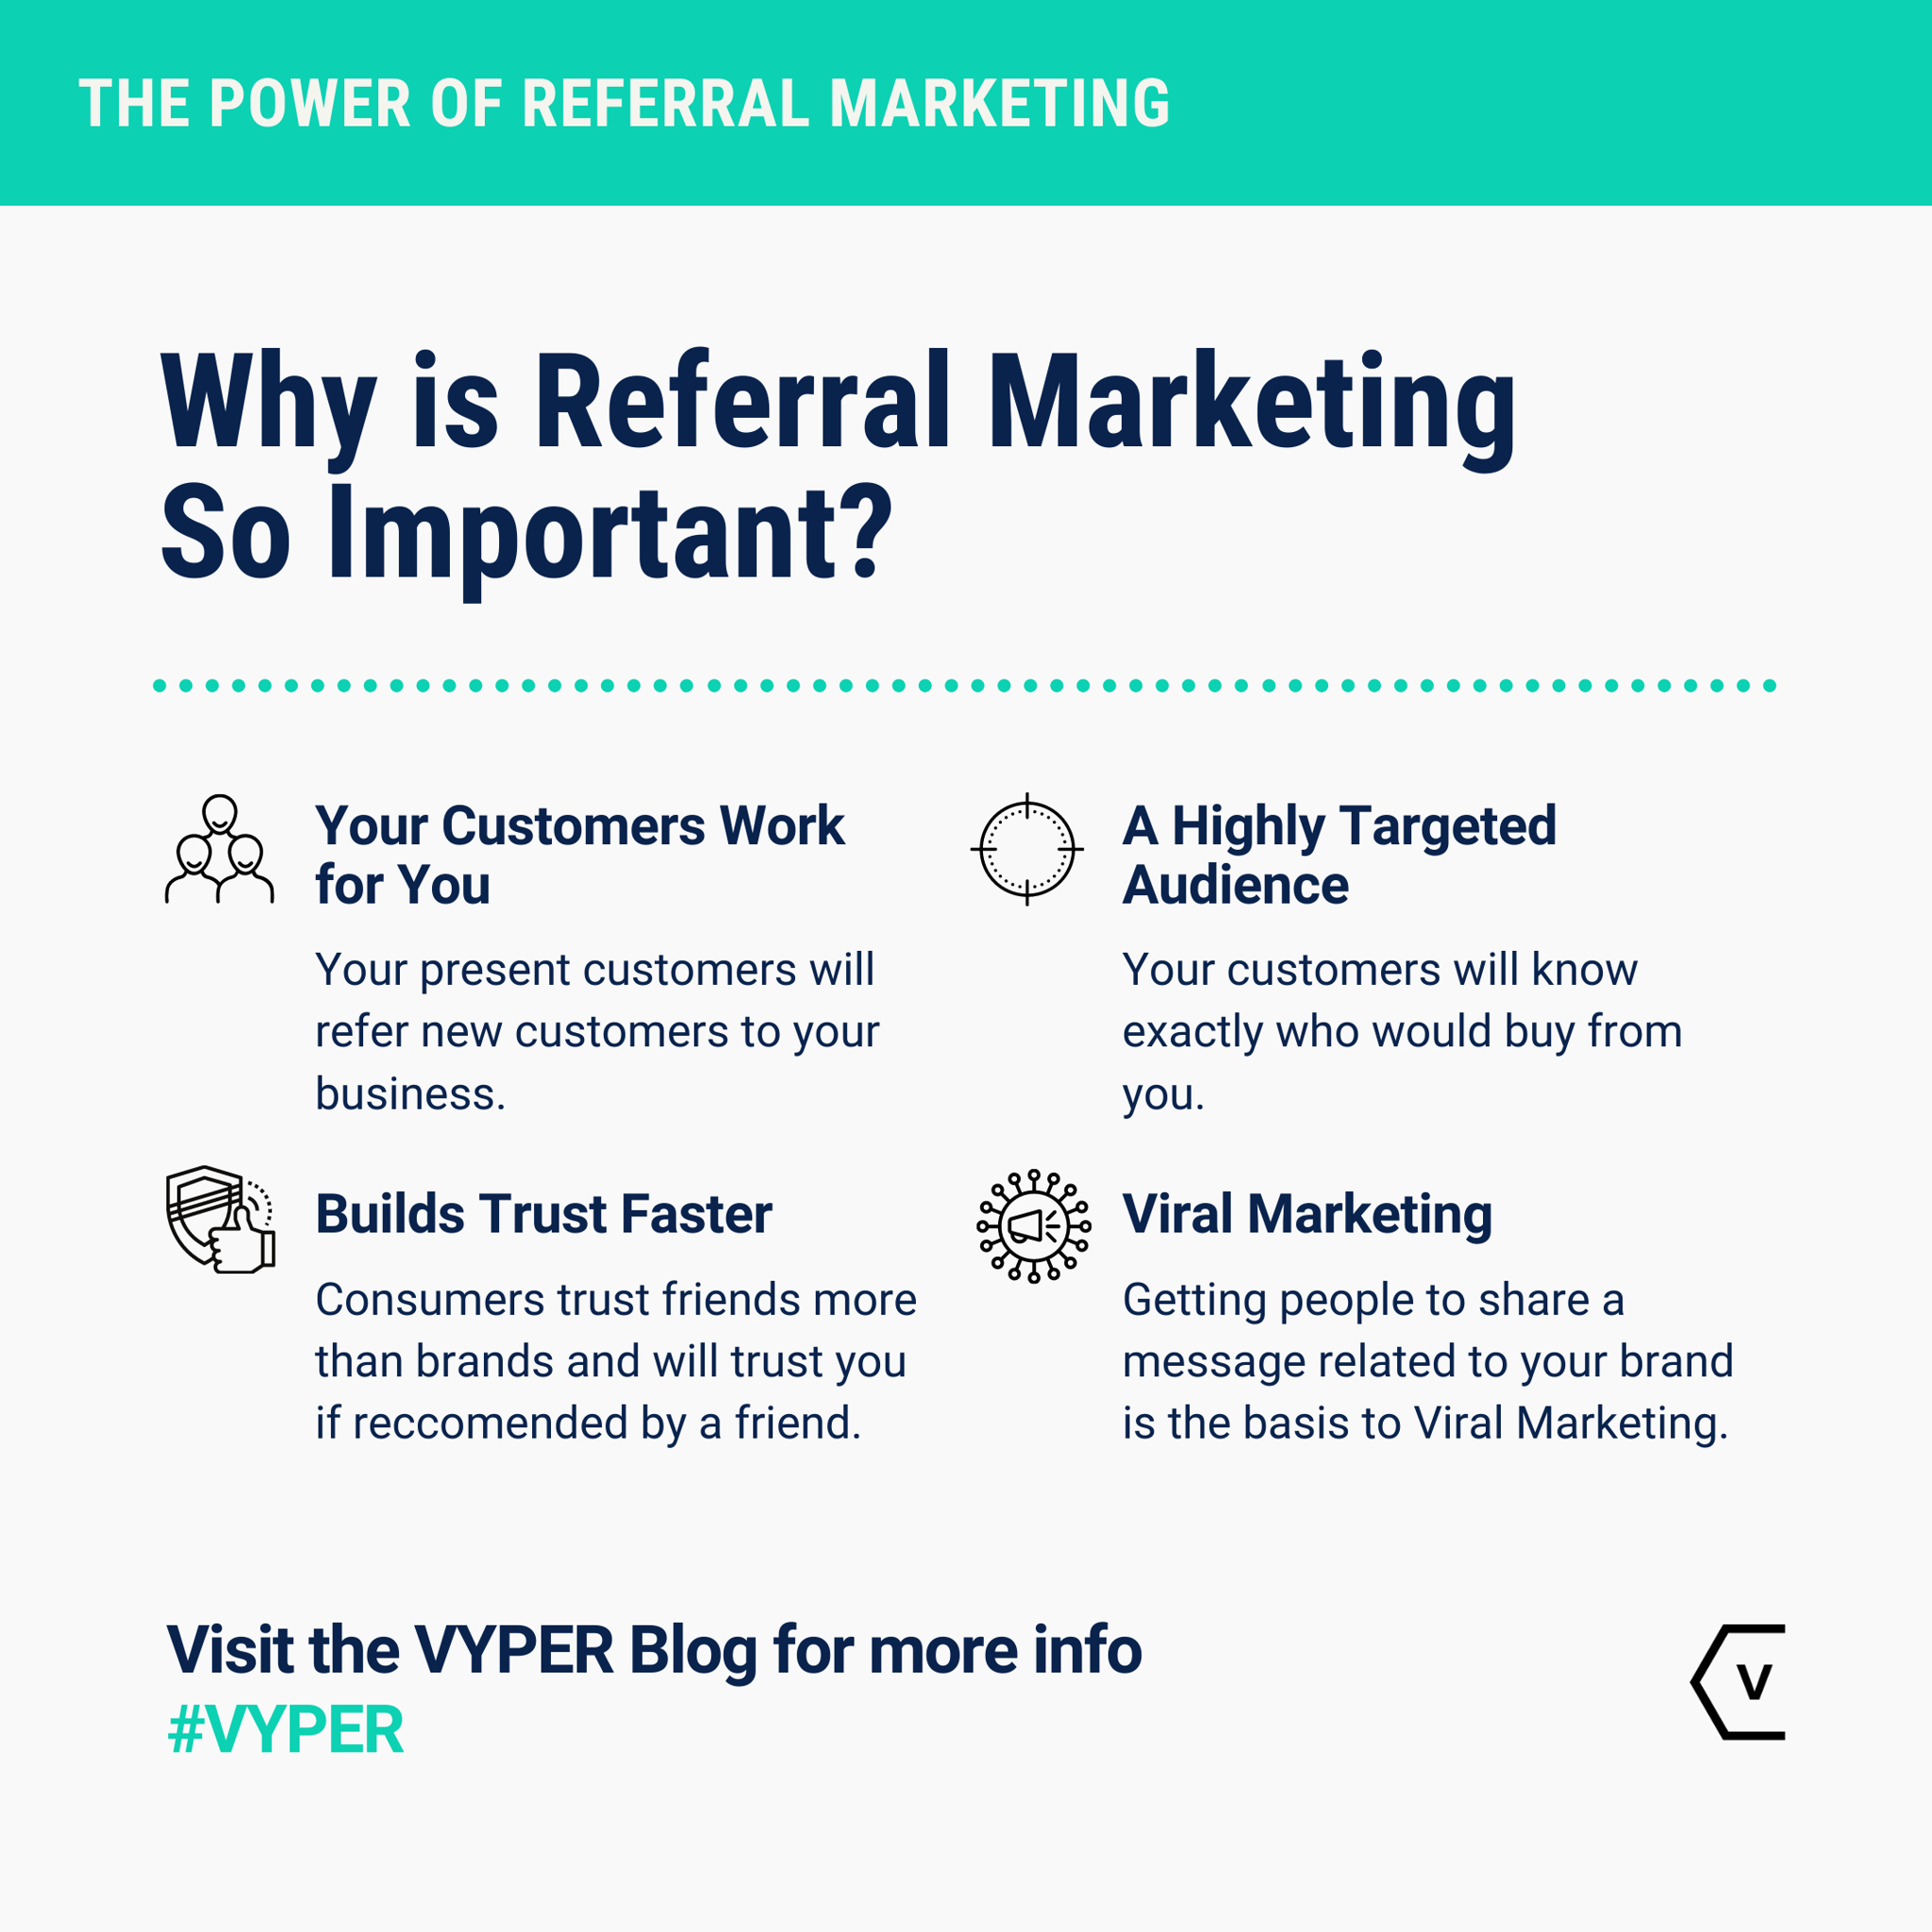 Referral Marketing Examples